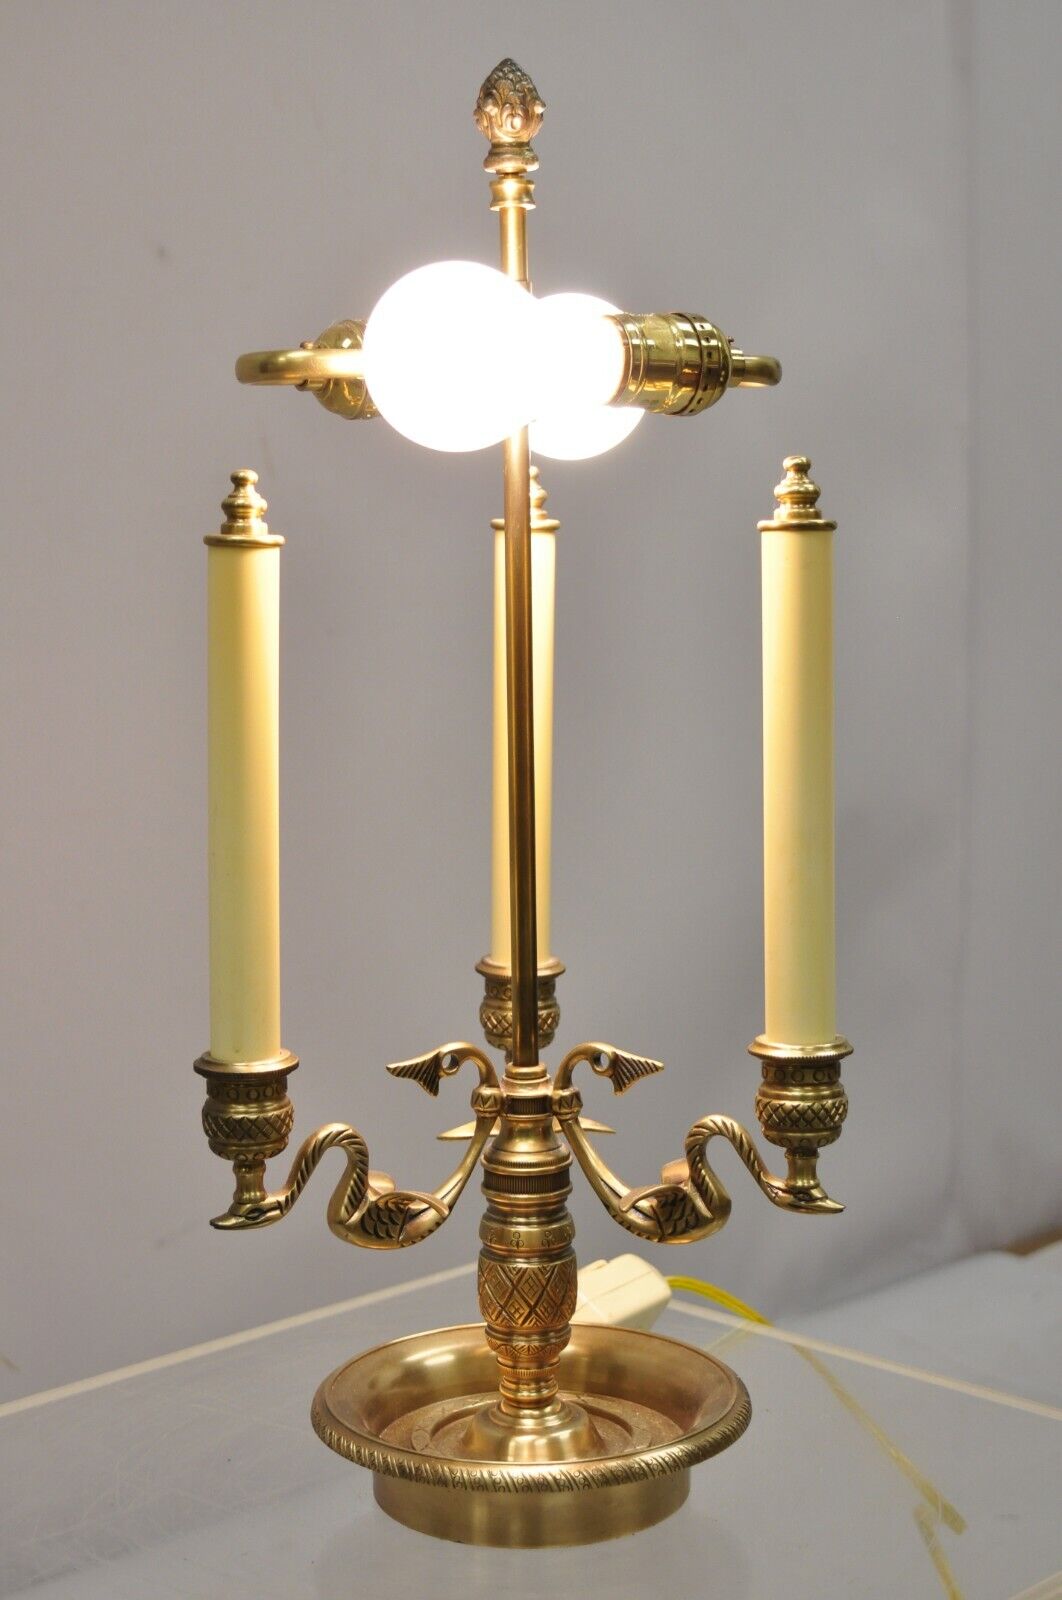 Empire Regency Style Brass Candlestick Bouillotte Desk Table Lamp with Swans (B)